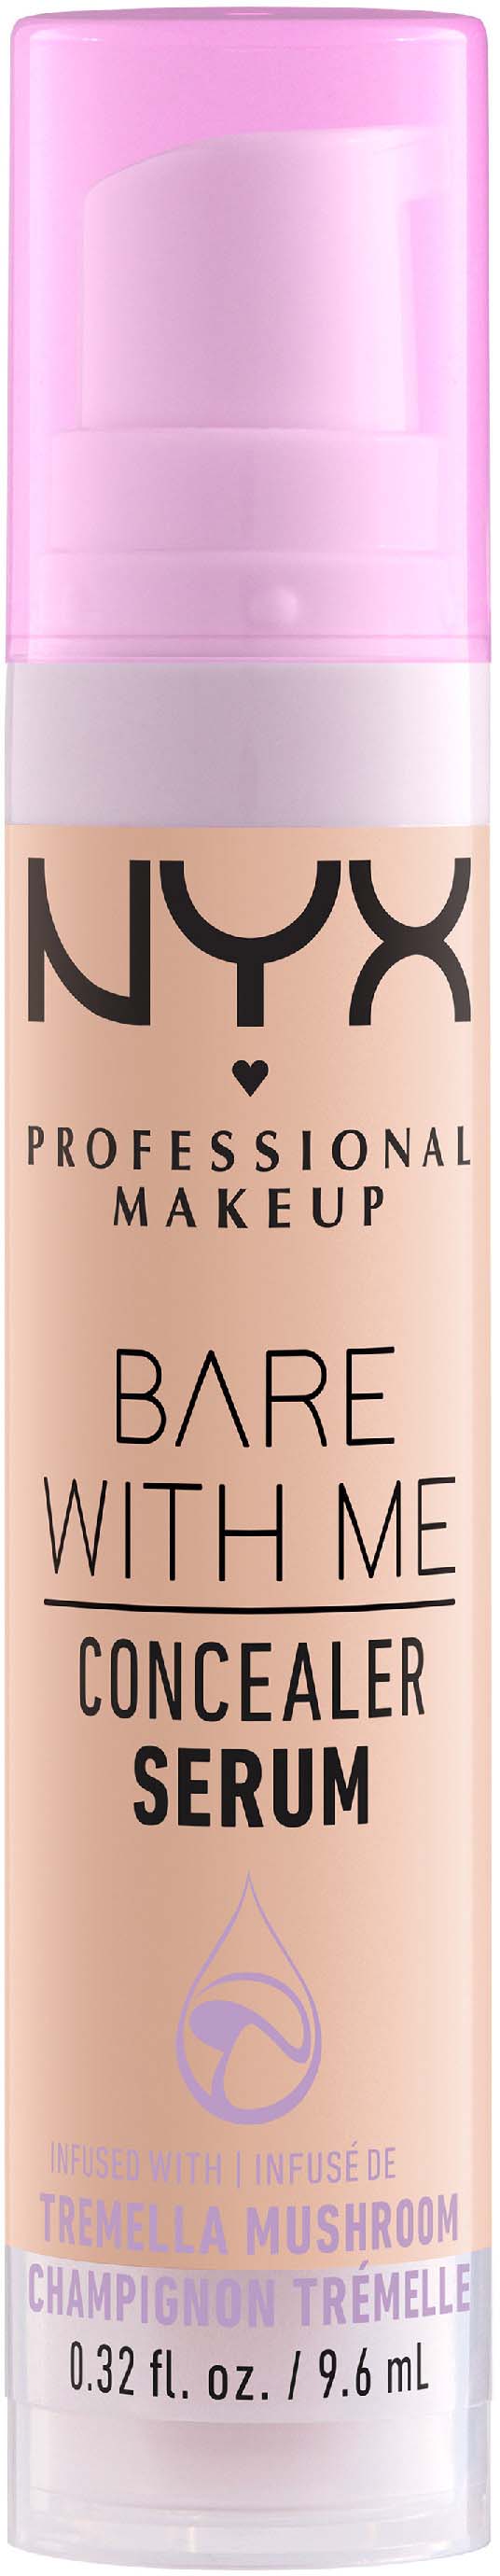 Serum PROFESSIONAL Light Me Bare With MAKEUP NYX Concealer